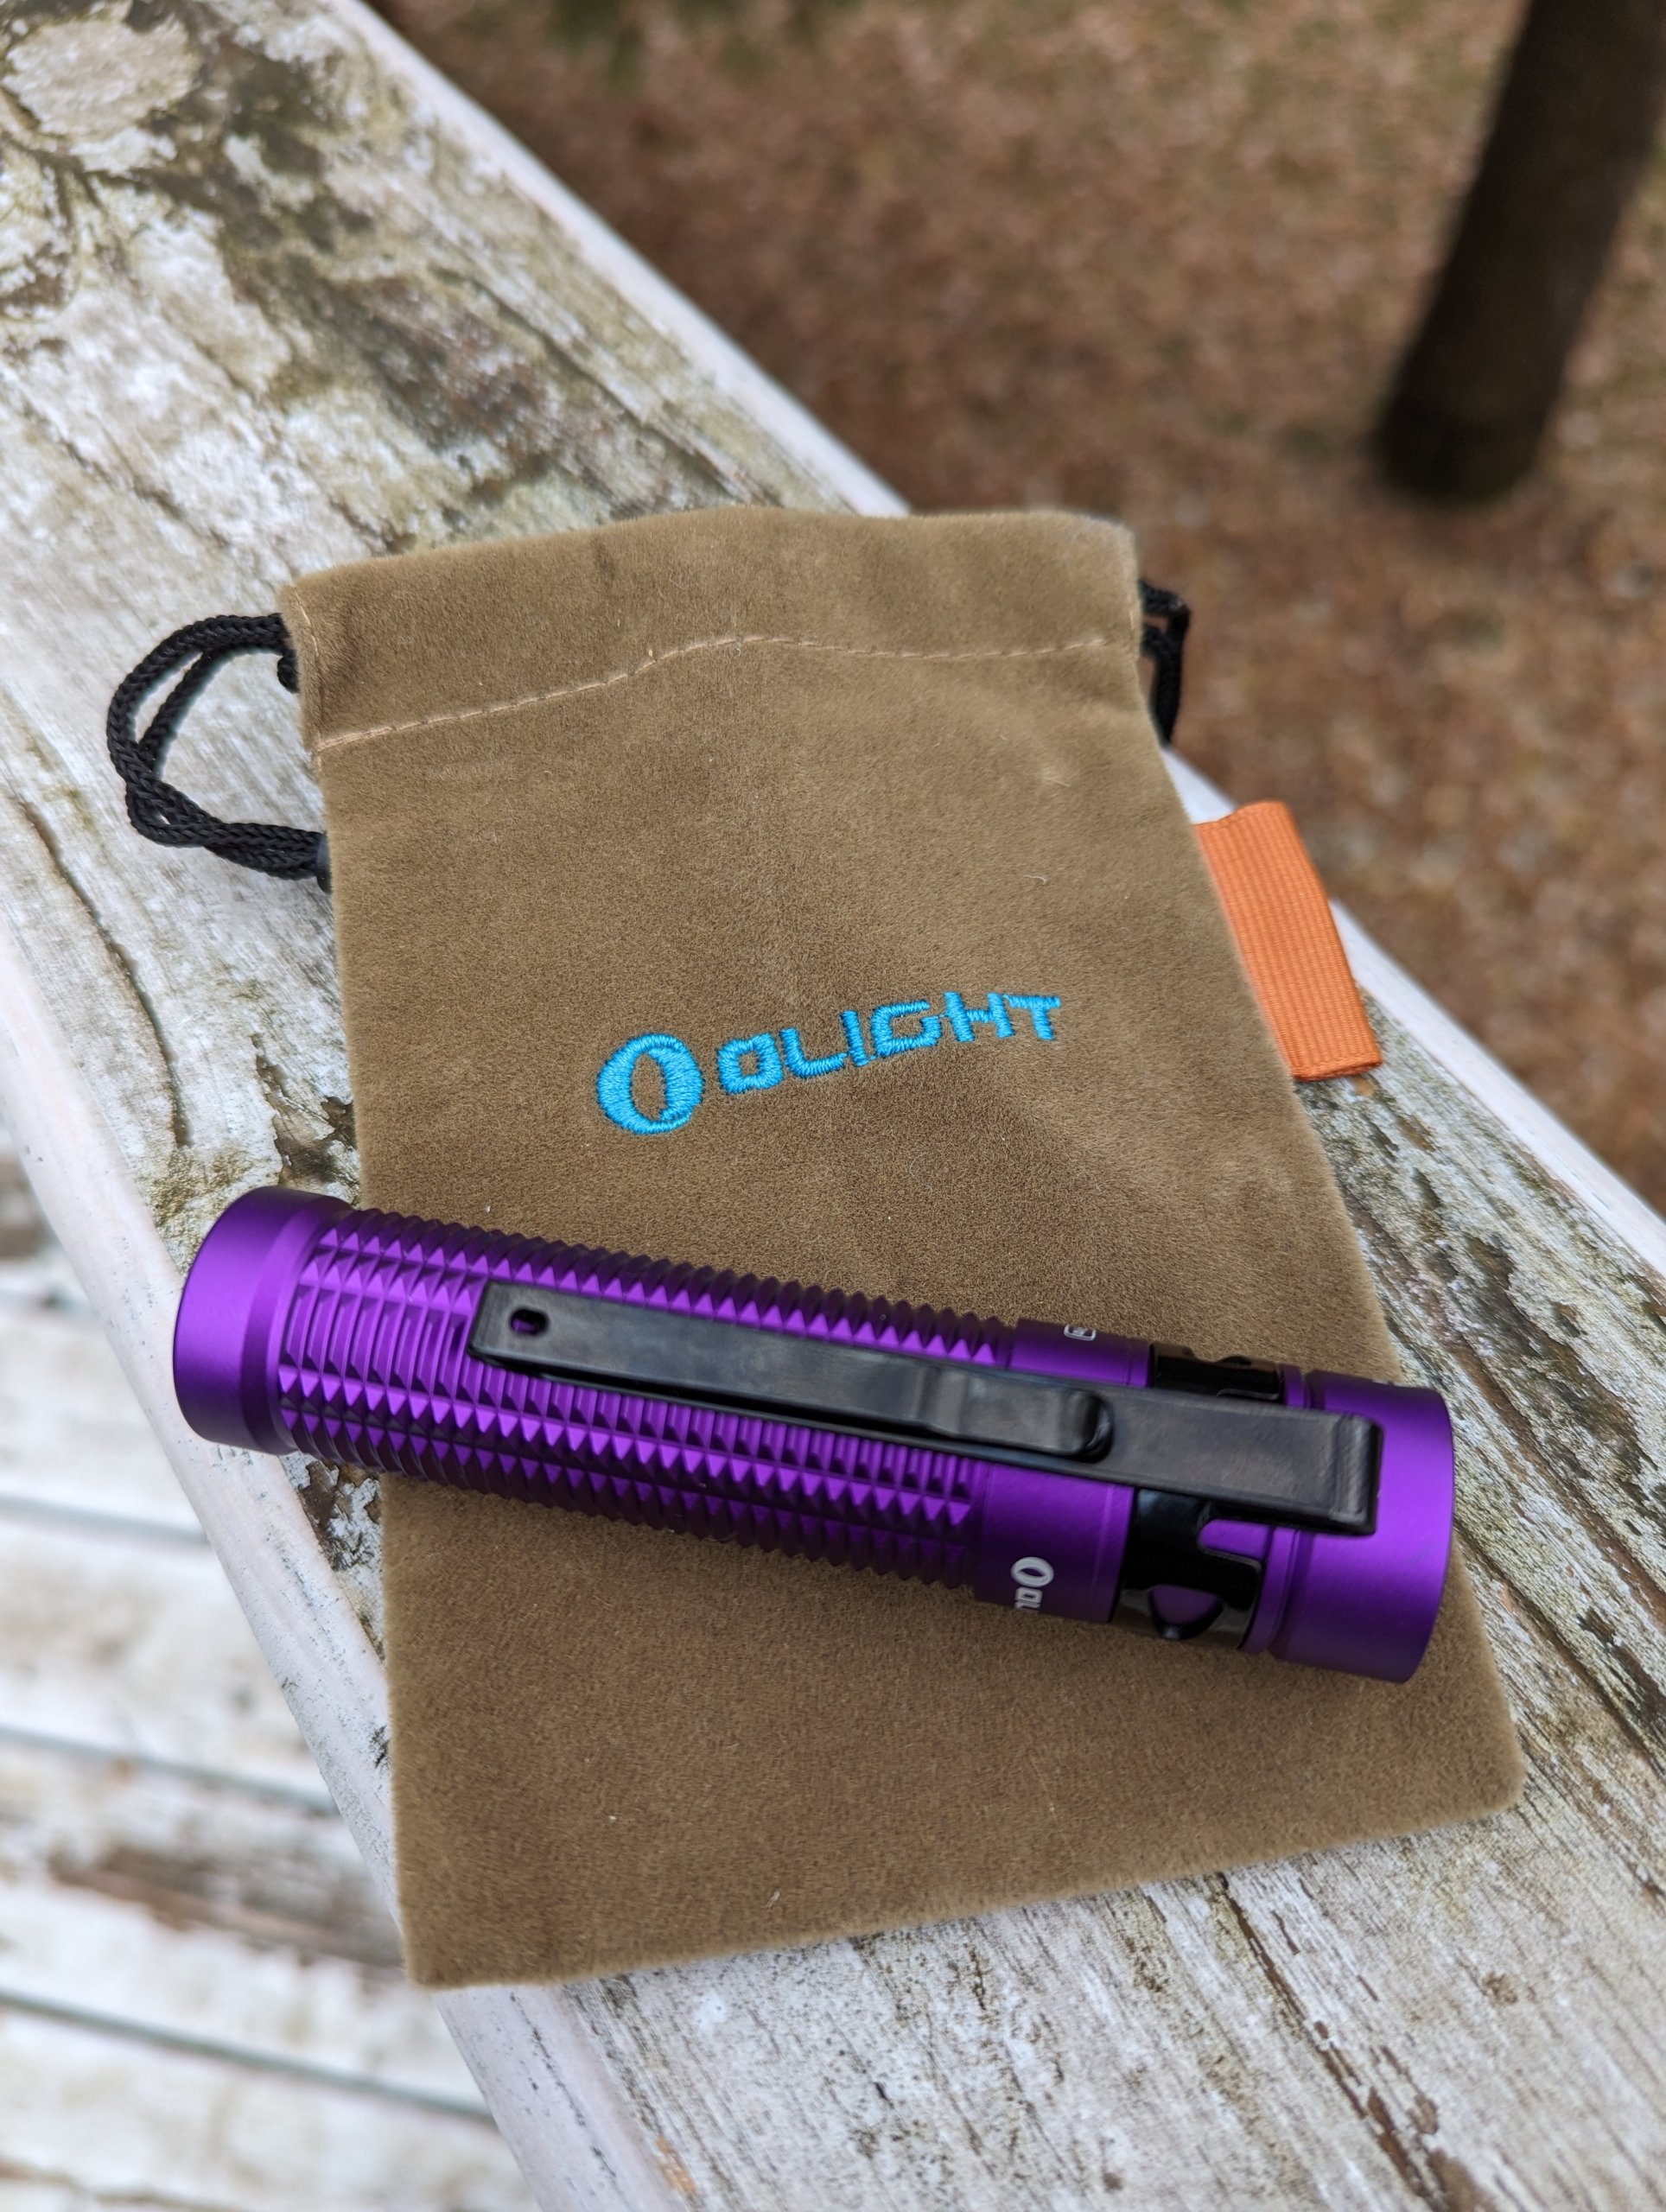 The Otlight is compact and comes with accessories that make it easy to have with you whenever you need it scaled